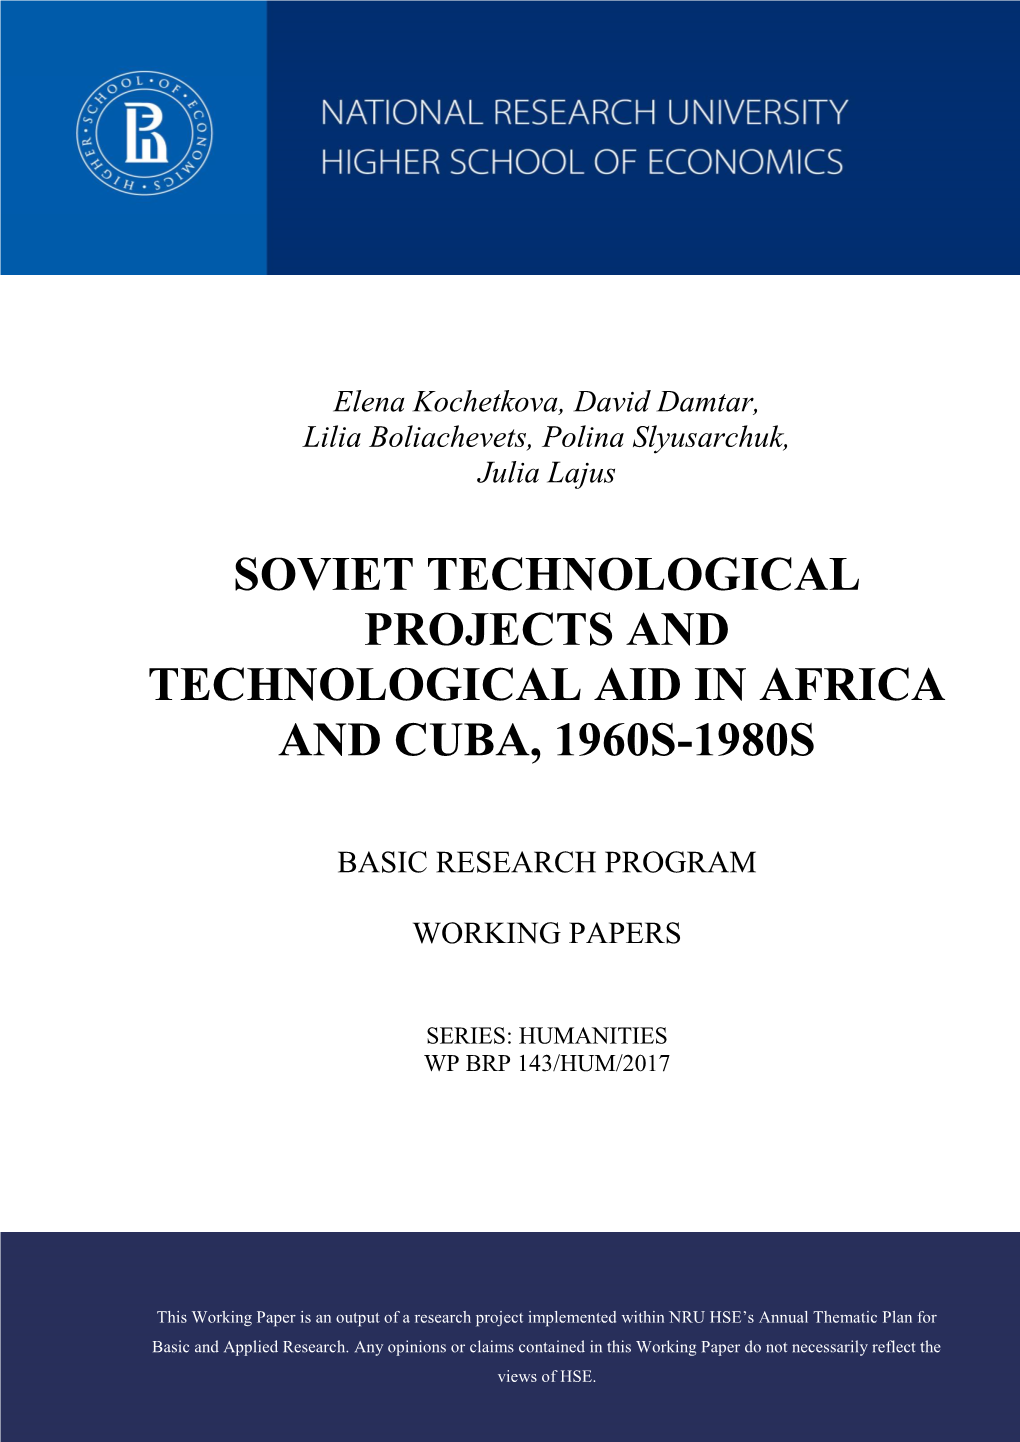 Soviet Technological Projects and Technological Aid in Africa and Cuba, 1960S-1980S